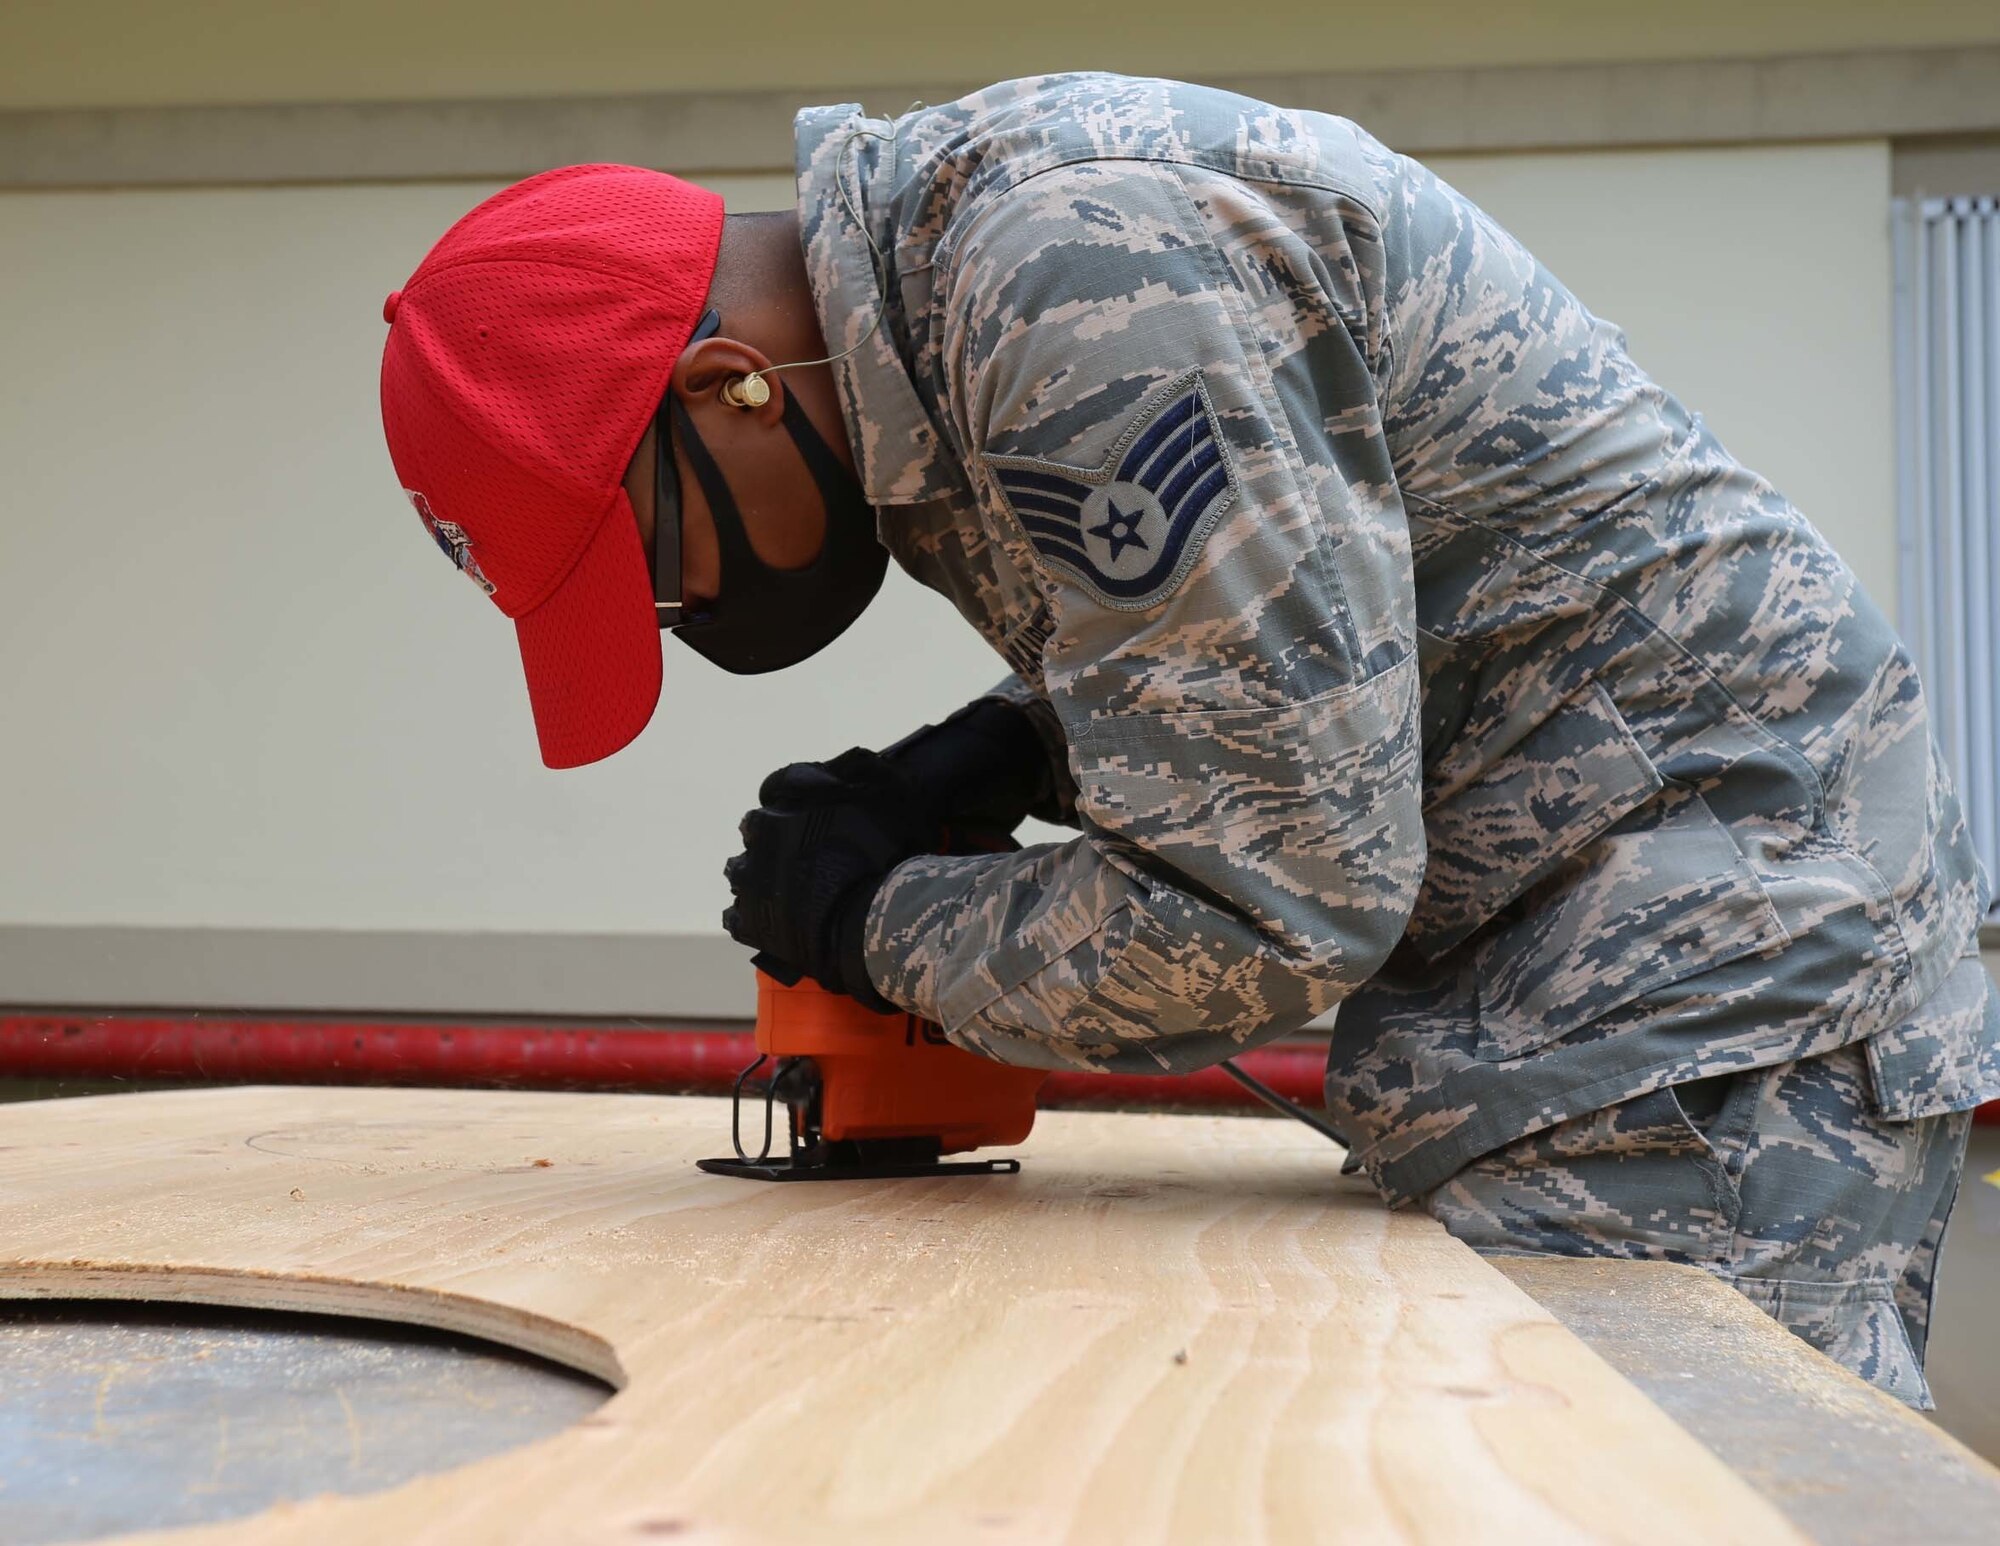 BARRIGADA, Guam (April 20, 2020) – Staff Sgt. Jude Santos, 254th REDHORSE Squadron, Guam Air National Guard, cuts plywood for an environmental control unit installation at the Skilled Nursing Facility in Barrigada April 20. The Guam National Guard continues to work with federal and local agencies during the island’s fight against COVID-19. (U.S. Army National Guard photo by JoAnna Delfin)